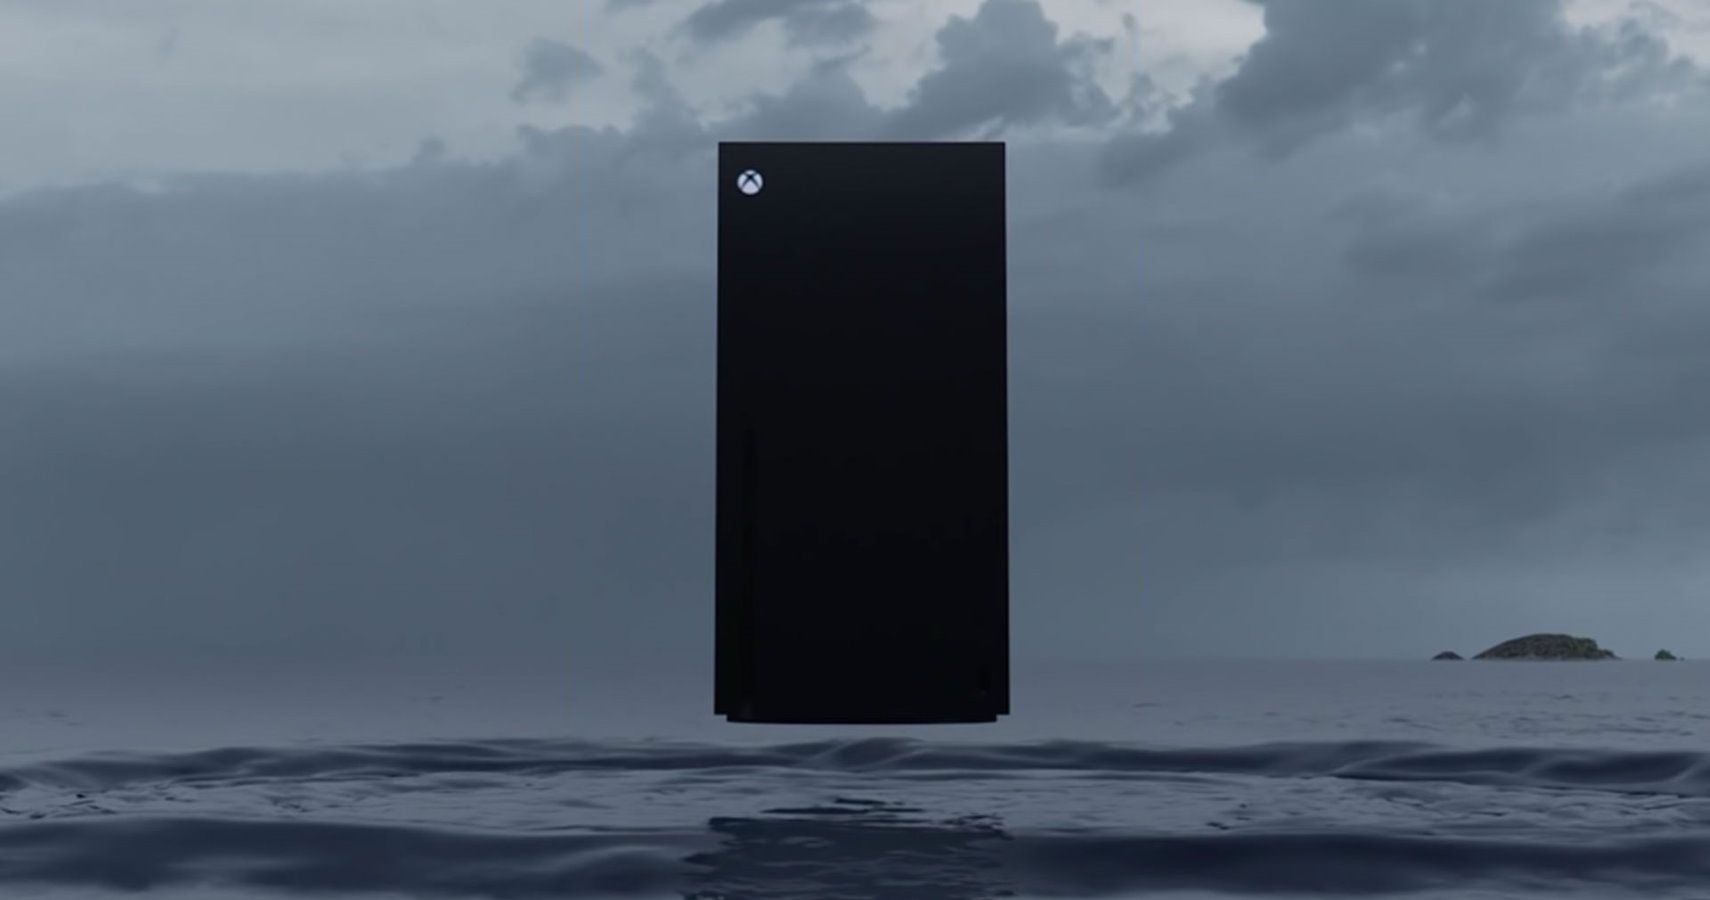 Xbox Series X To Have Dedicated OnBoard Audio Chip